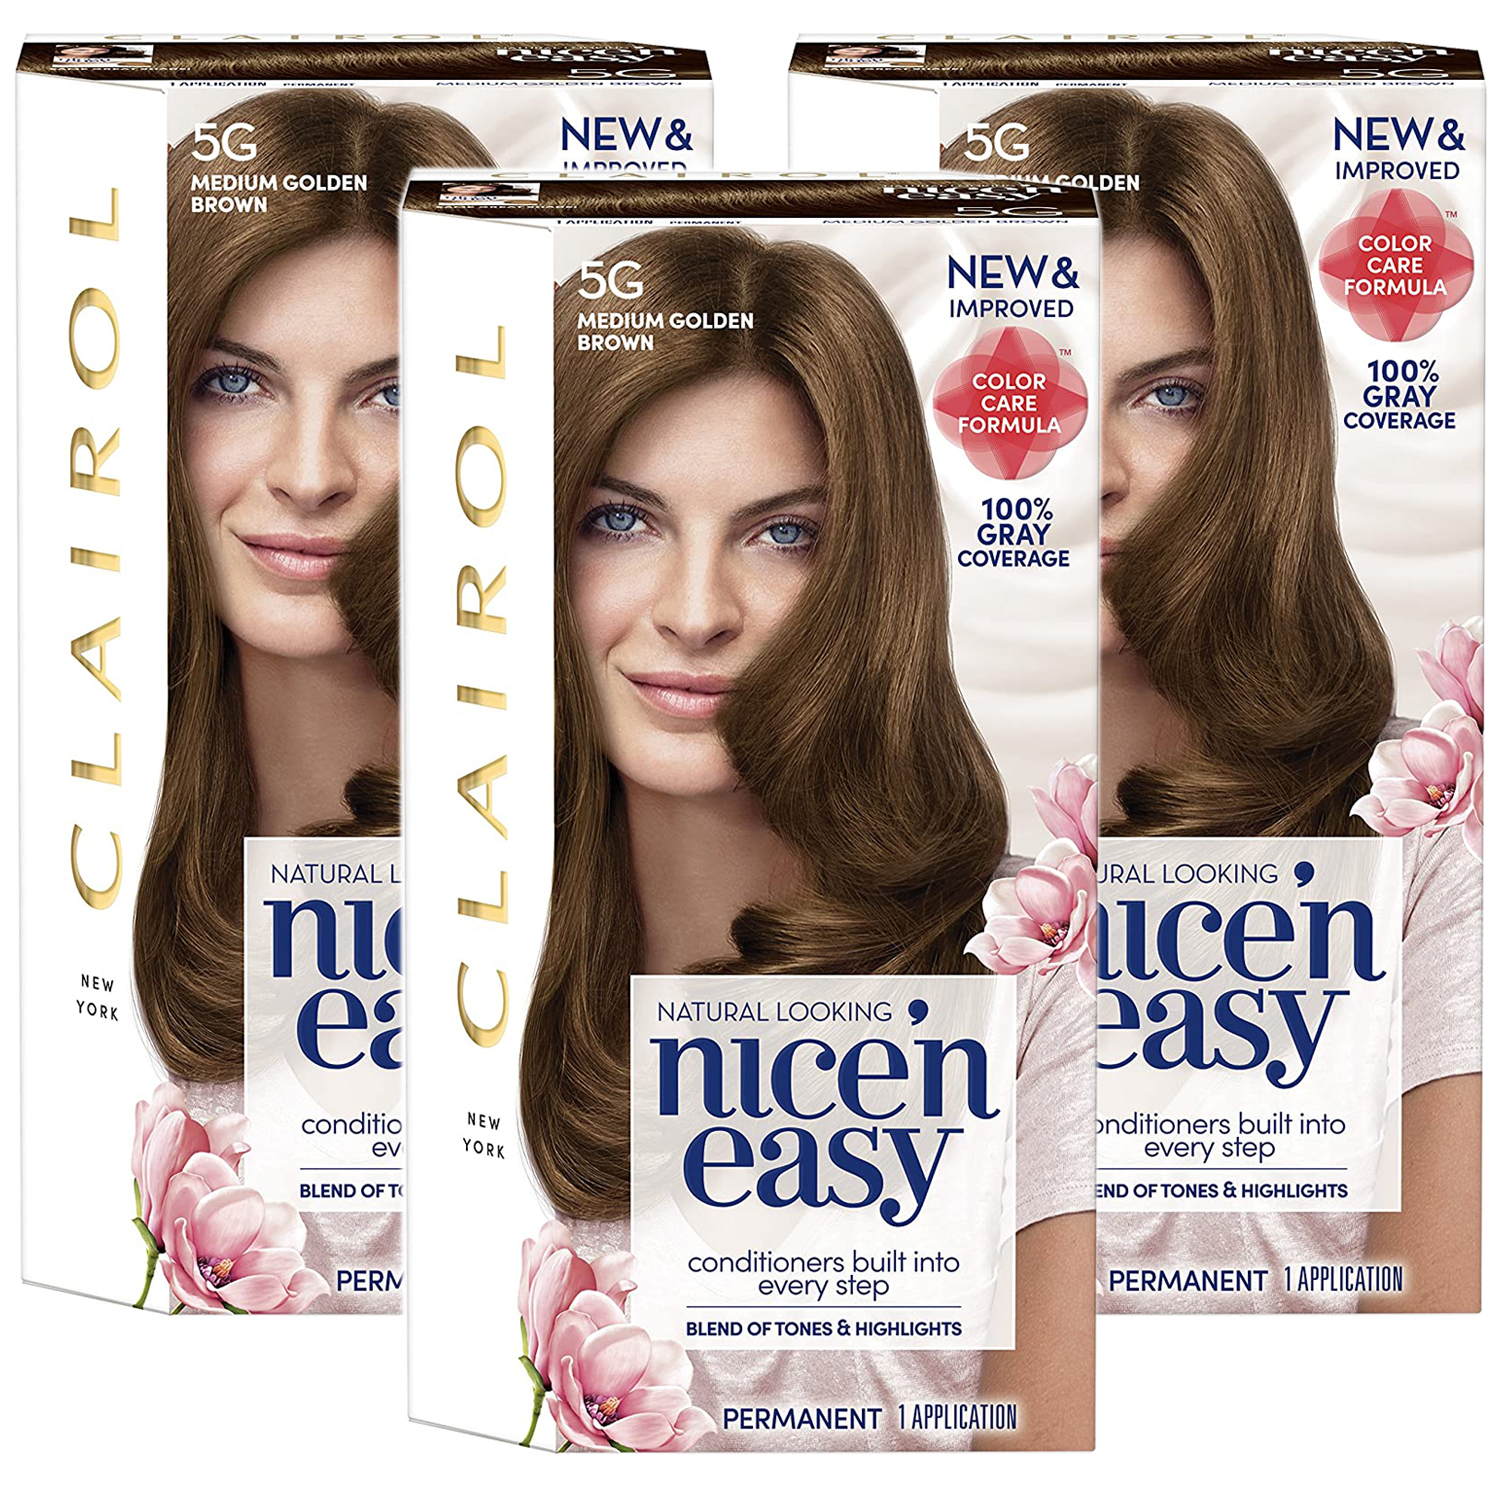 Primary image for 3-New Clairol Nice 'n Easy Permanent Color Kit 2.4 Oz, 5g Medium Golden Brown